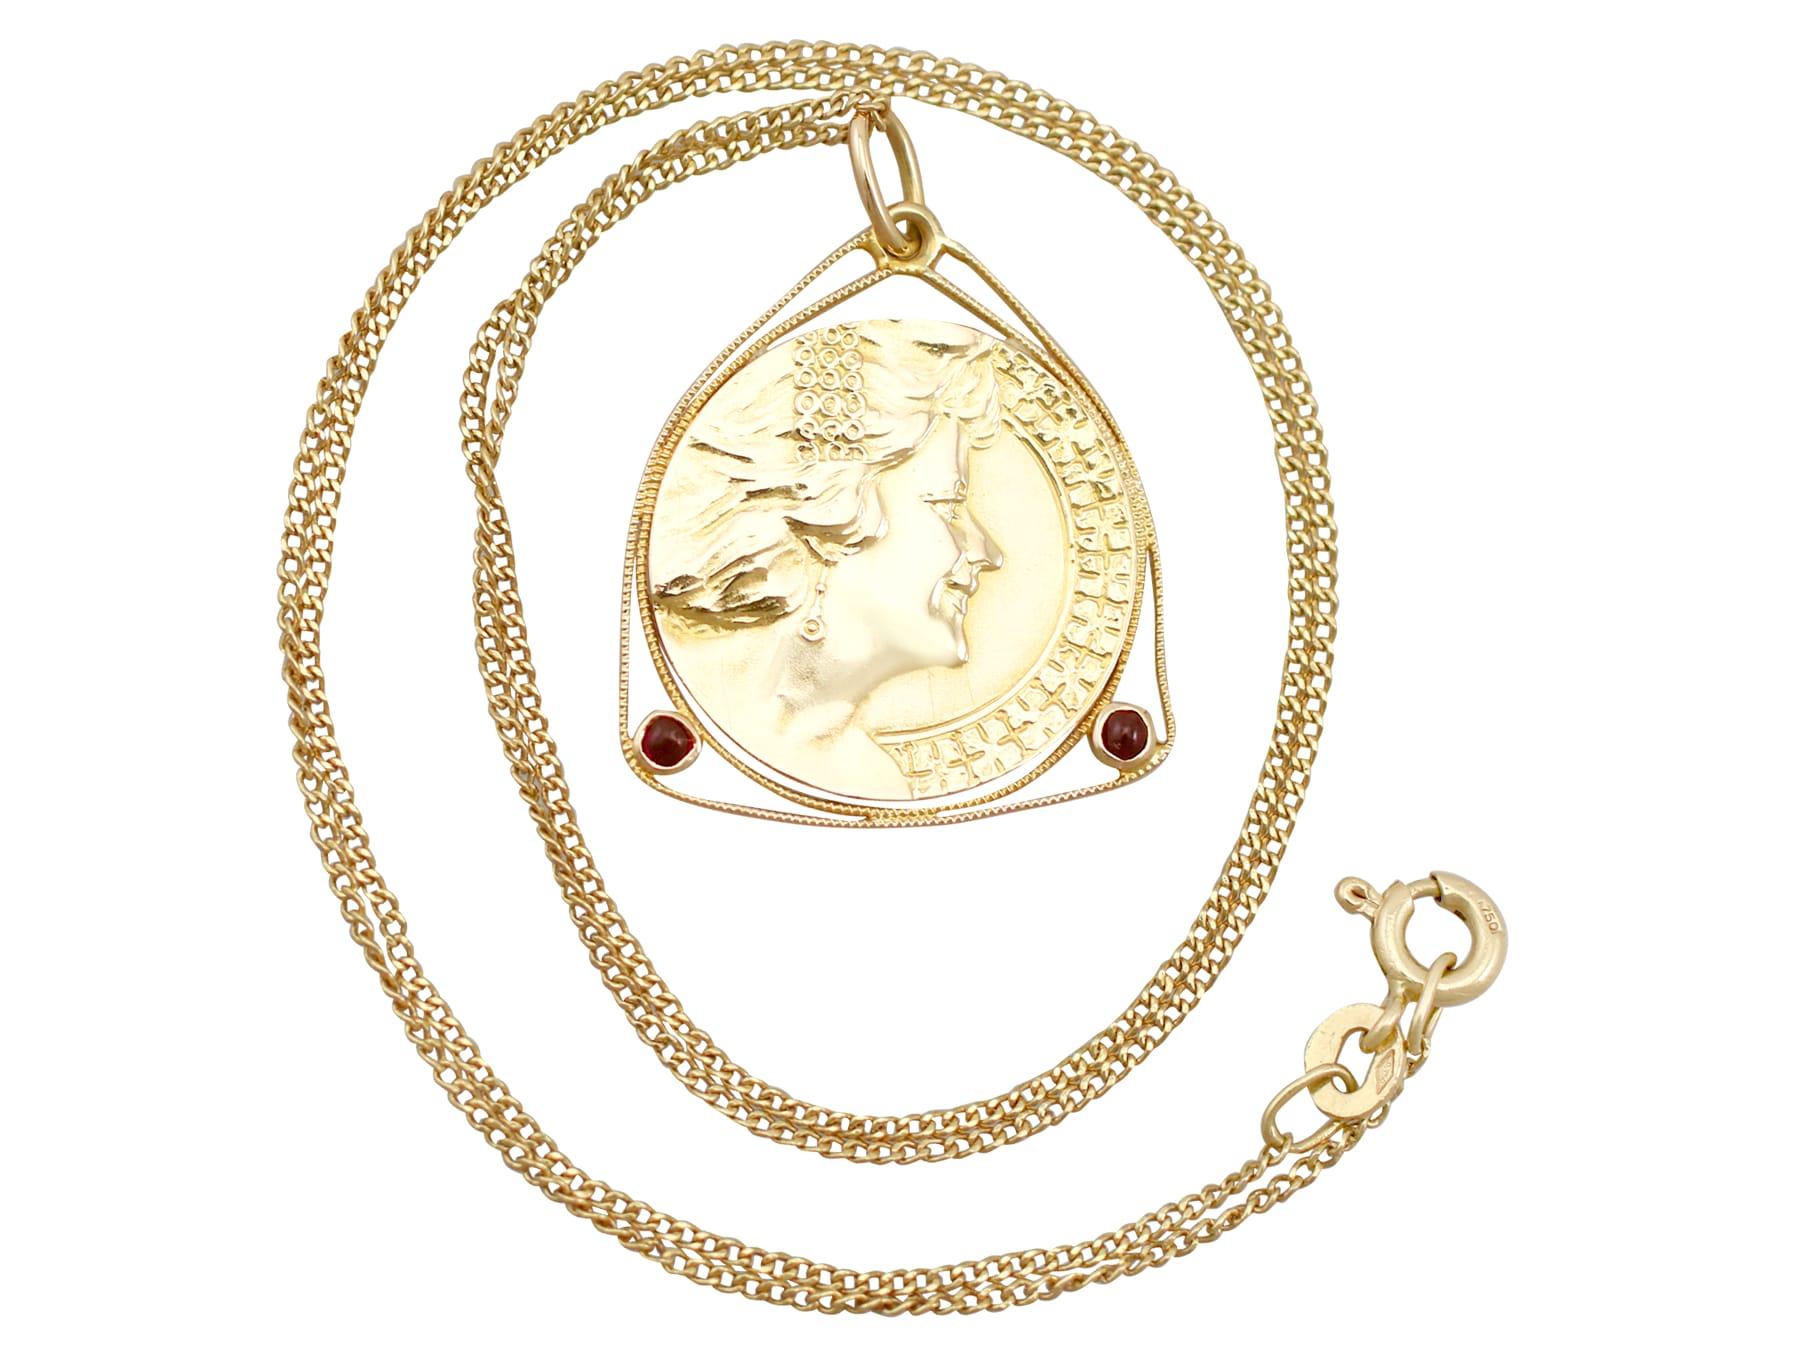 An impressive antique Art Nouveau 0.06 carat garnet and 18k yellow gold coin pendant; part of  diverse antique jewelry and estate jewelry collections.

This fine and impressive antique coin pendant has been crafted in 18k yellow gold.

The